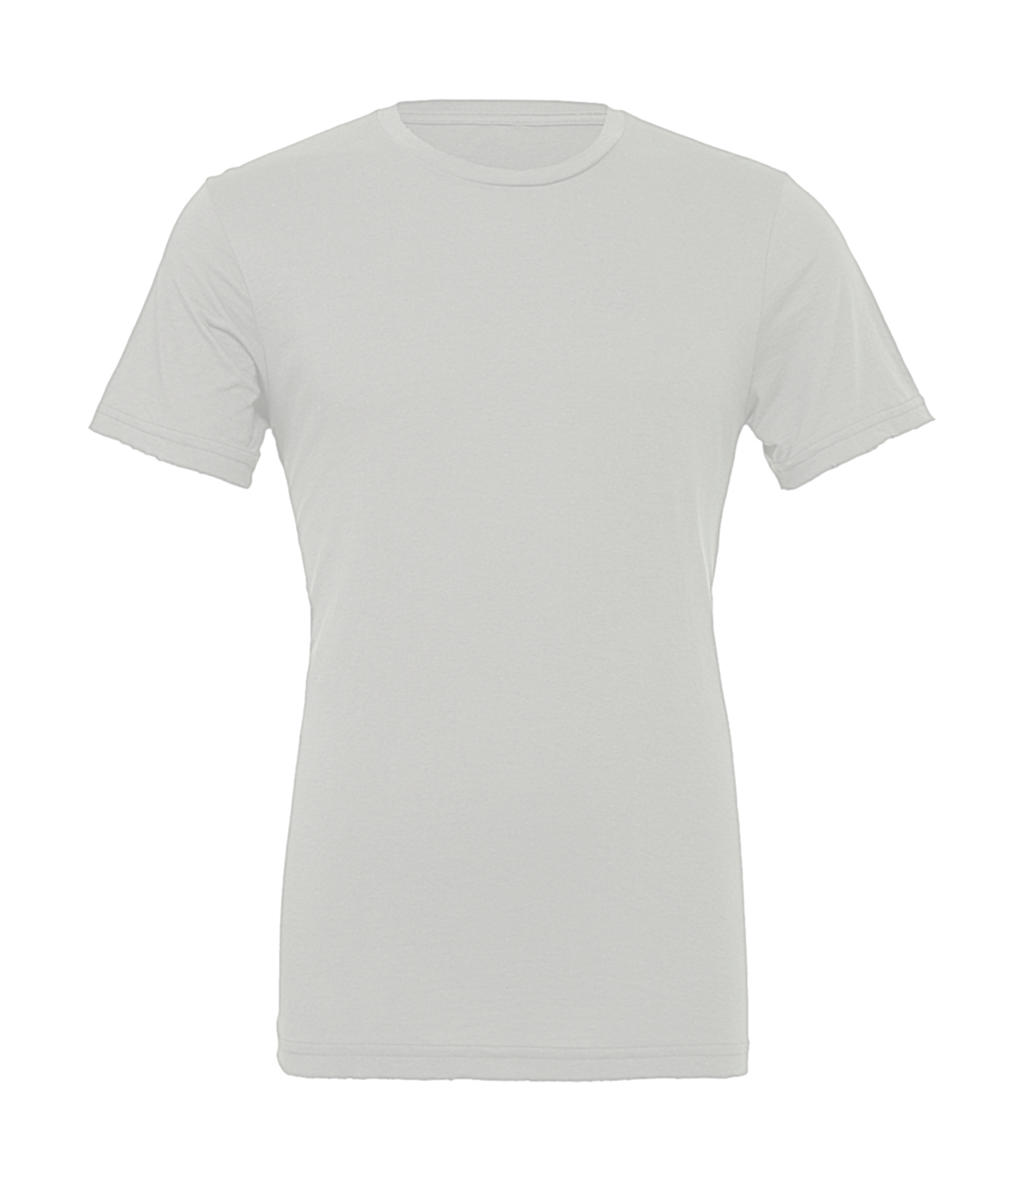  Unisex Jersey Short Sleeve Tee in Farbe Silver